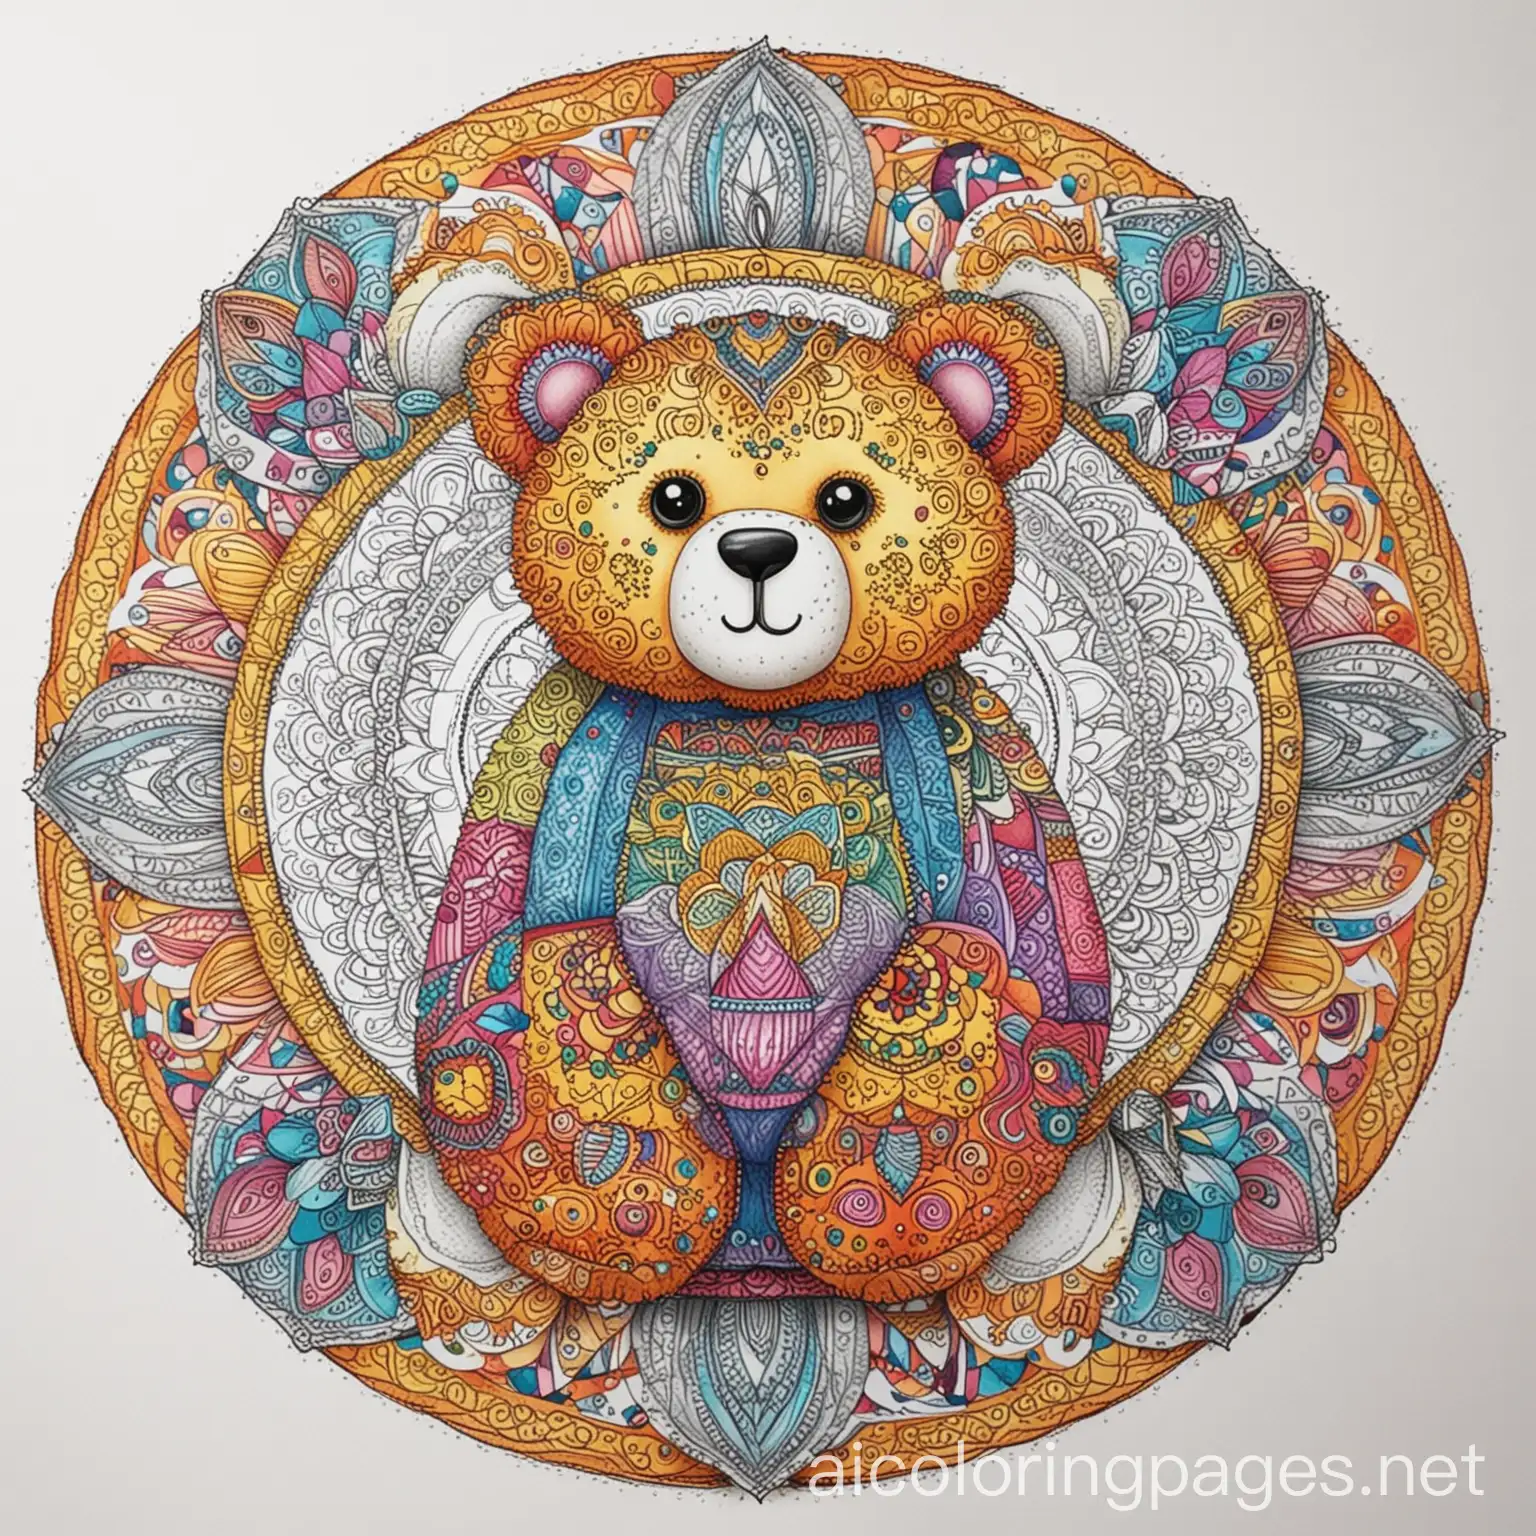 a colorful bright colored mandala Teddy Bear Picture, Coloring Page, black and white, line art, white background, Simplicity, Ample White Space. The background of the coloring page is plain white to make it easy for young children to color within the lines. The outlines of all the subjects are easy to distinguish, making it simple for kids to color without too much difficulty